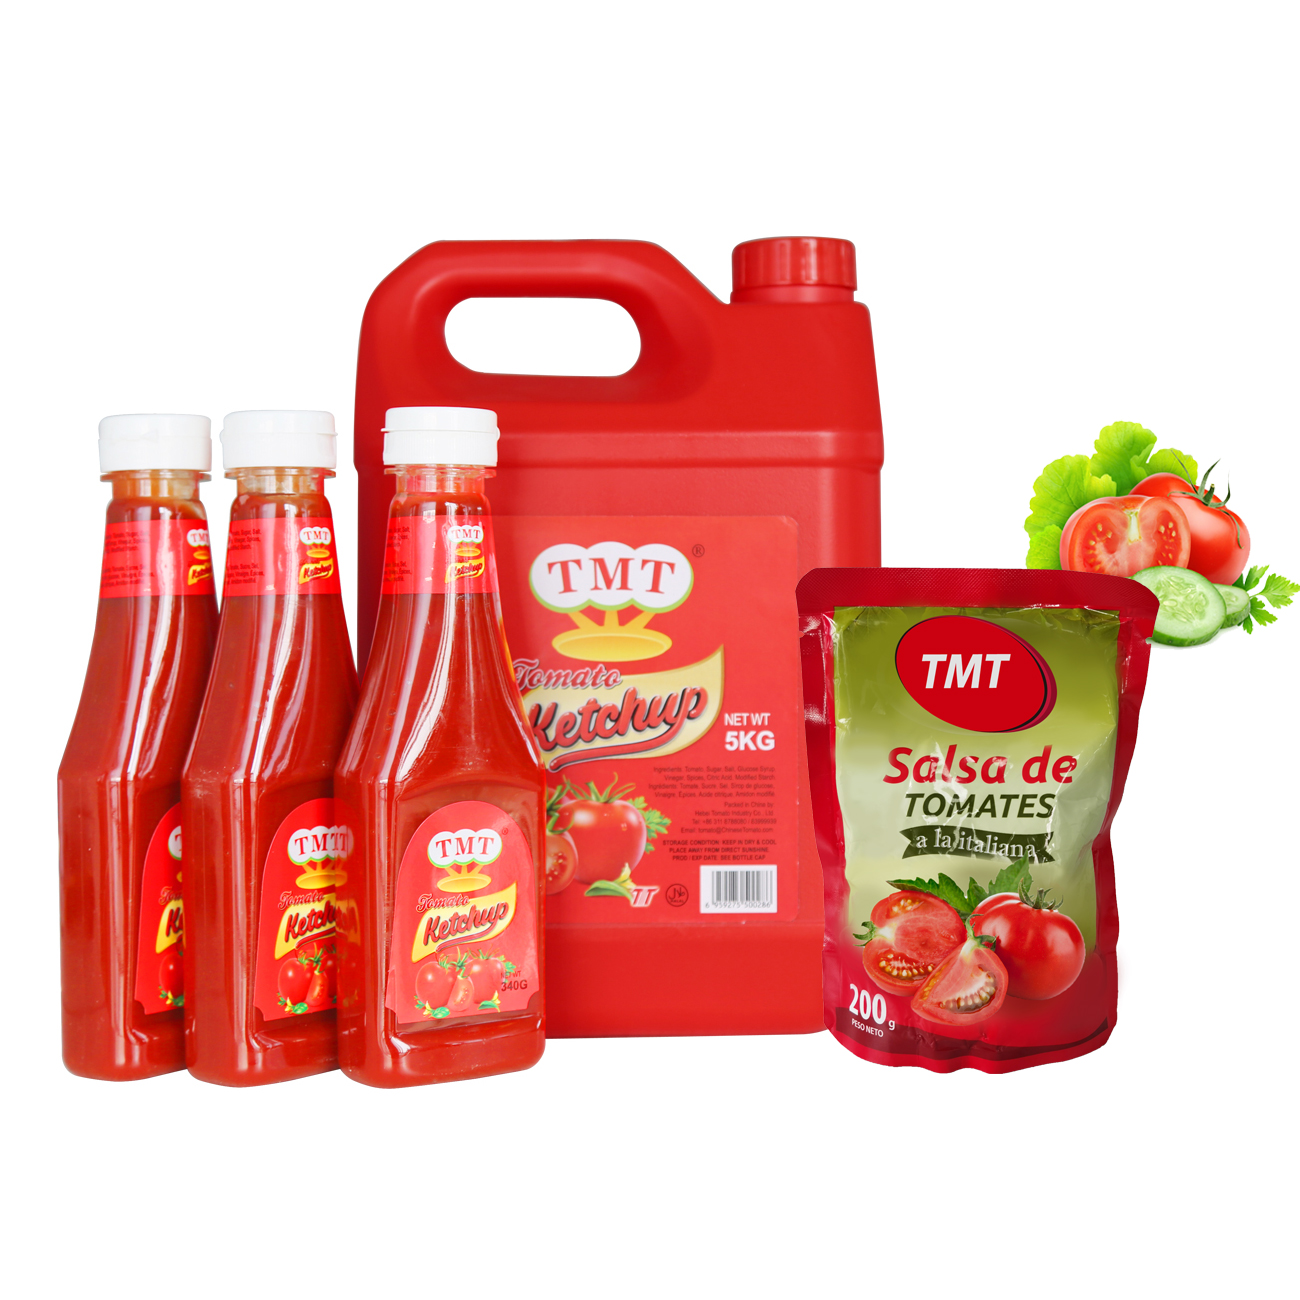 Tomato paste and tomato ketchup factory in China